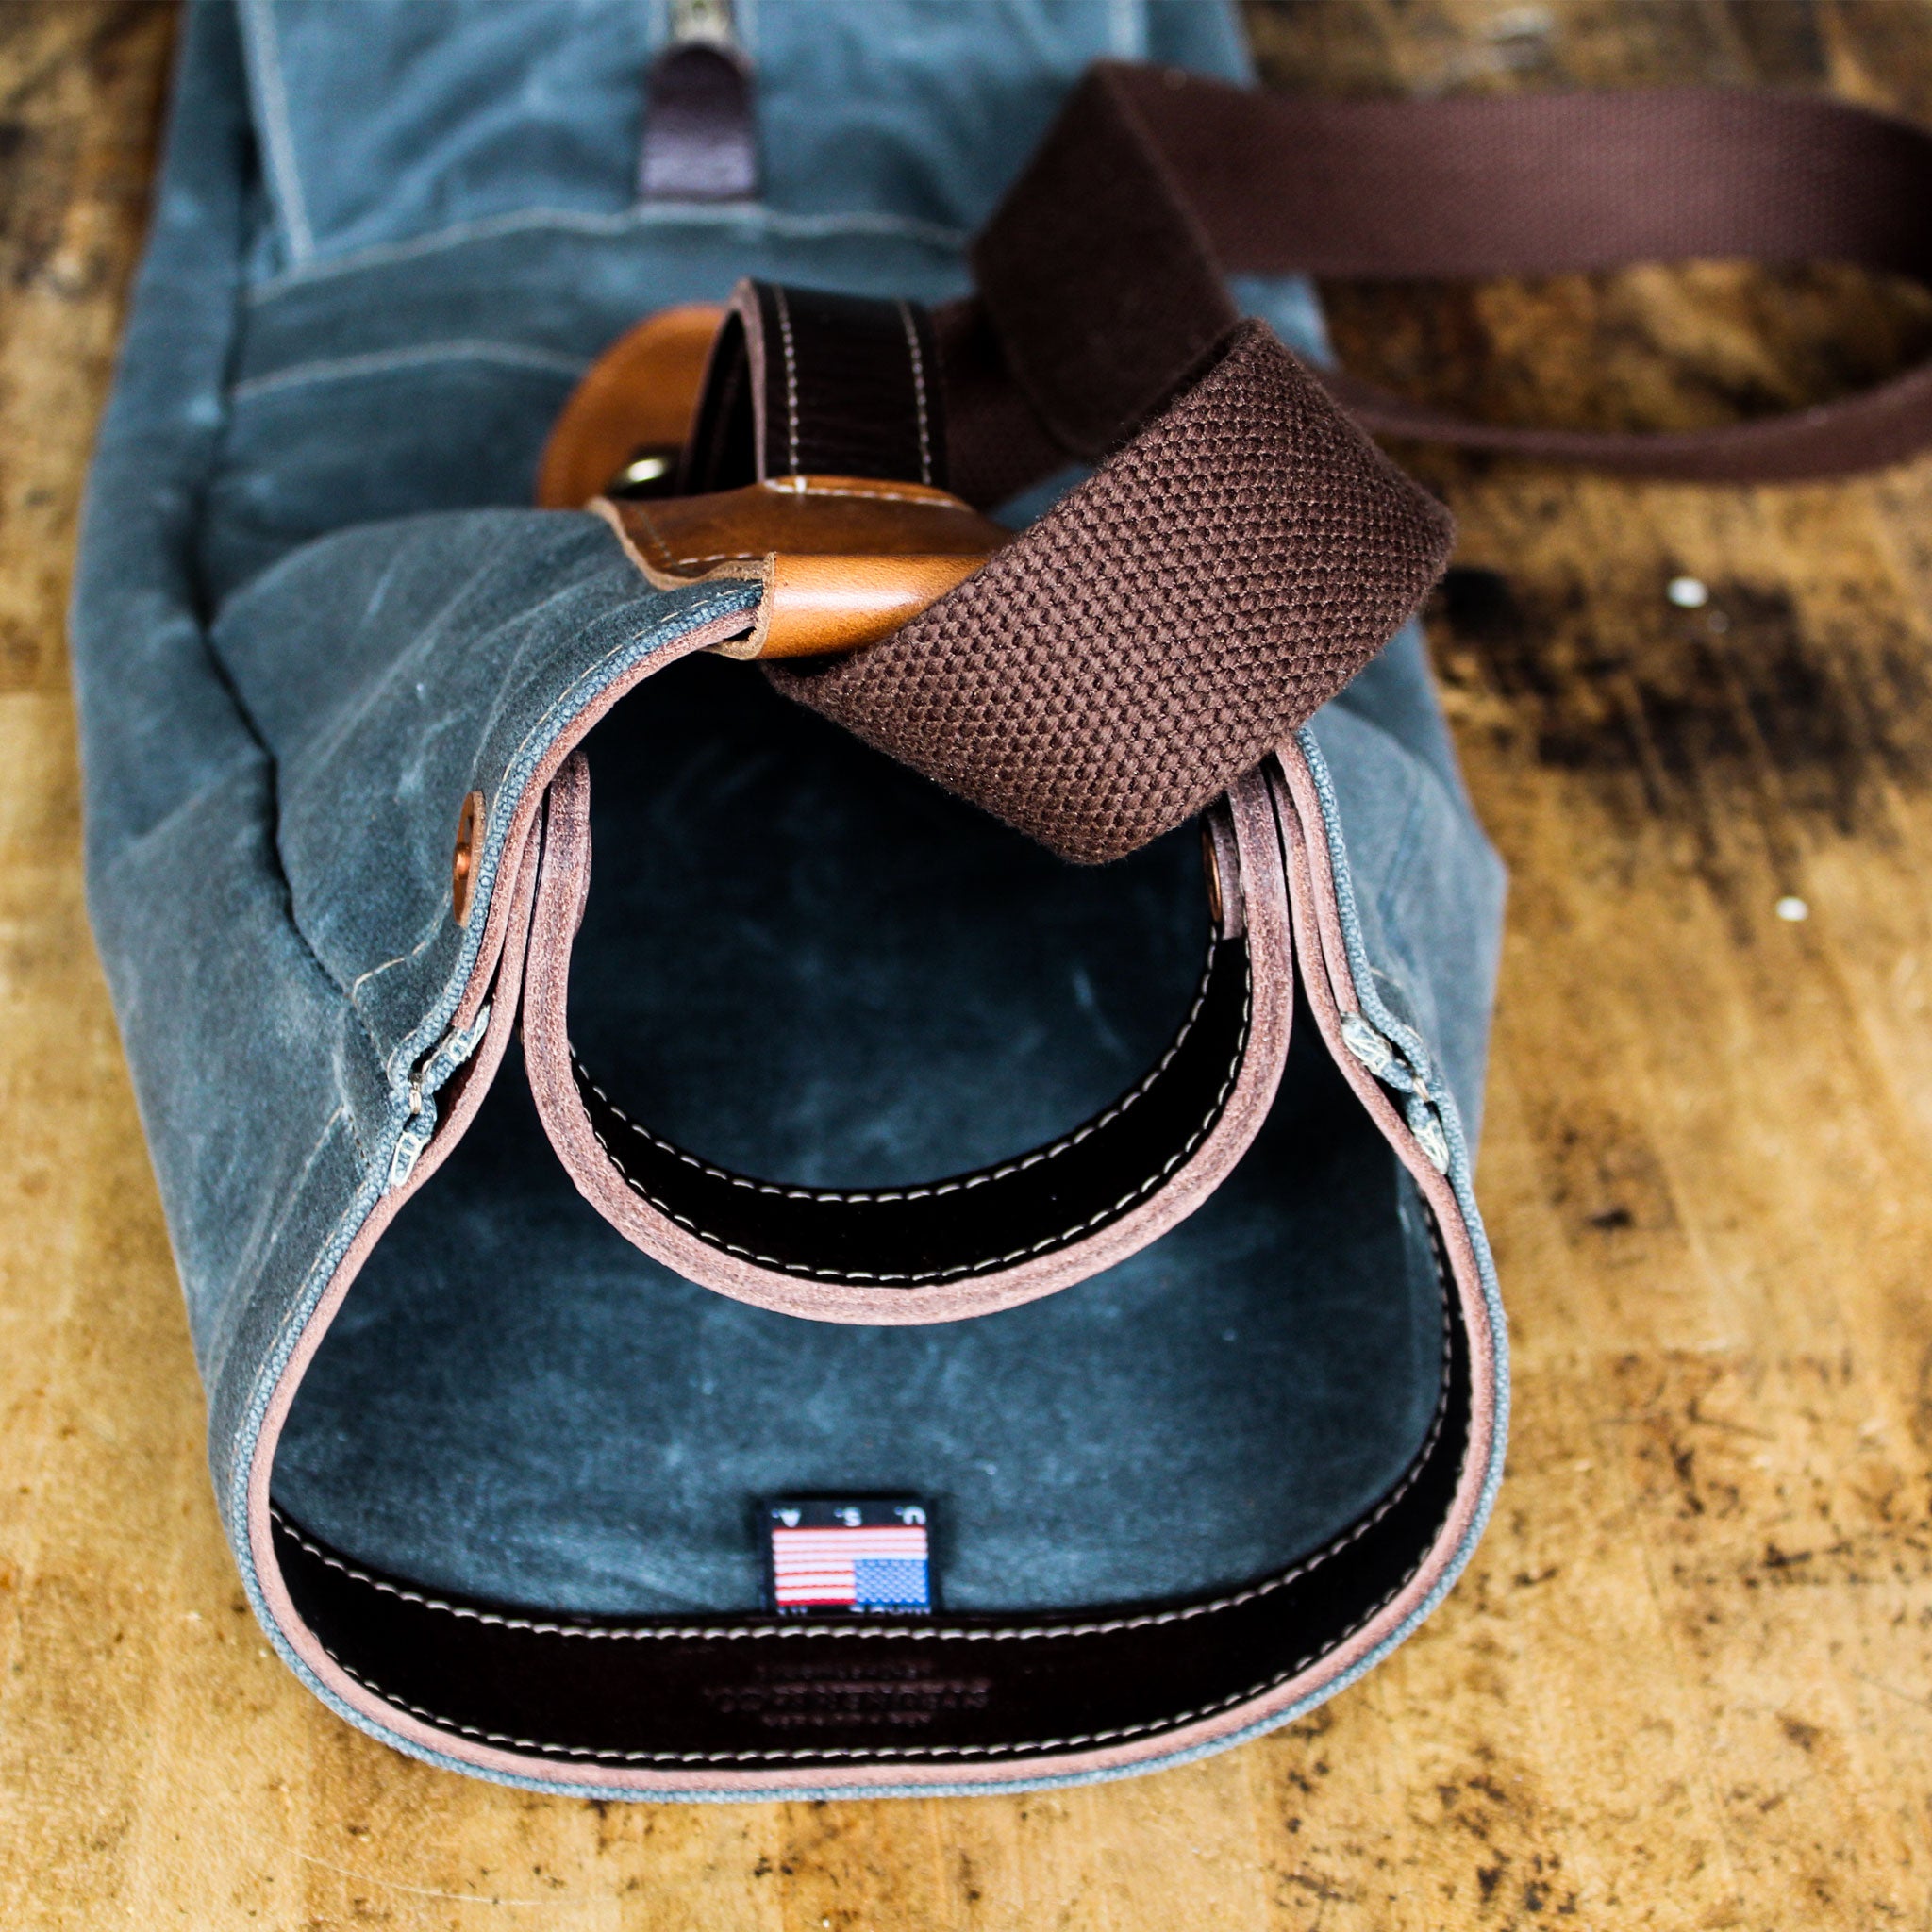 Handmade crossbody bags, totes, and wallets made from waxed canvas